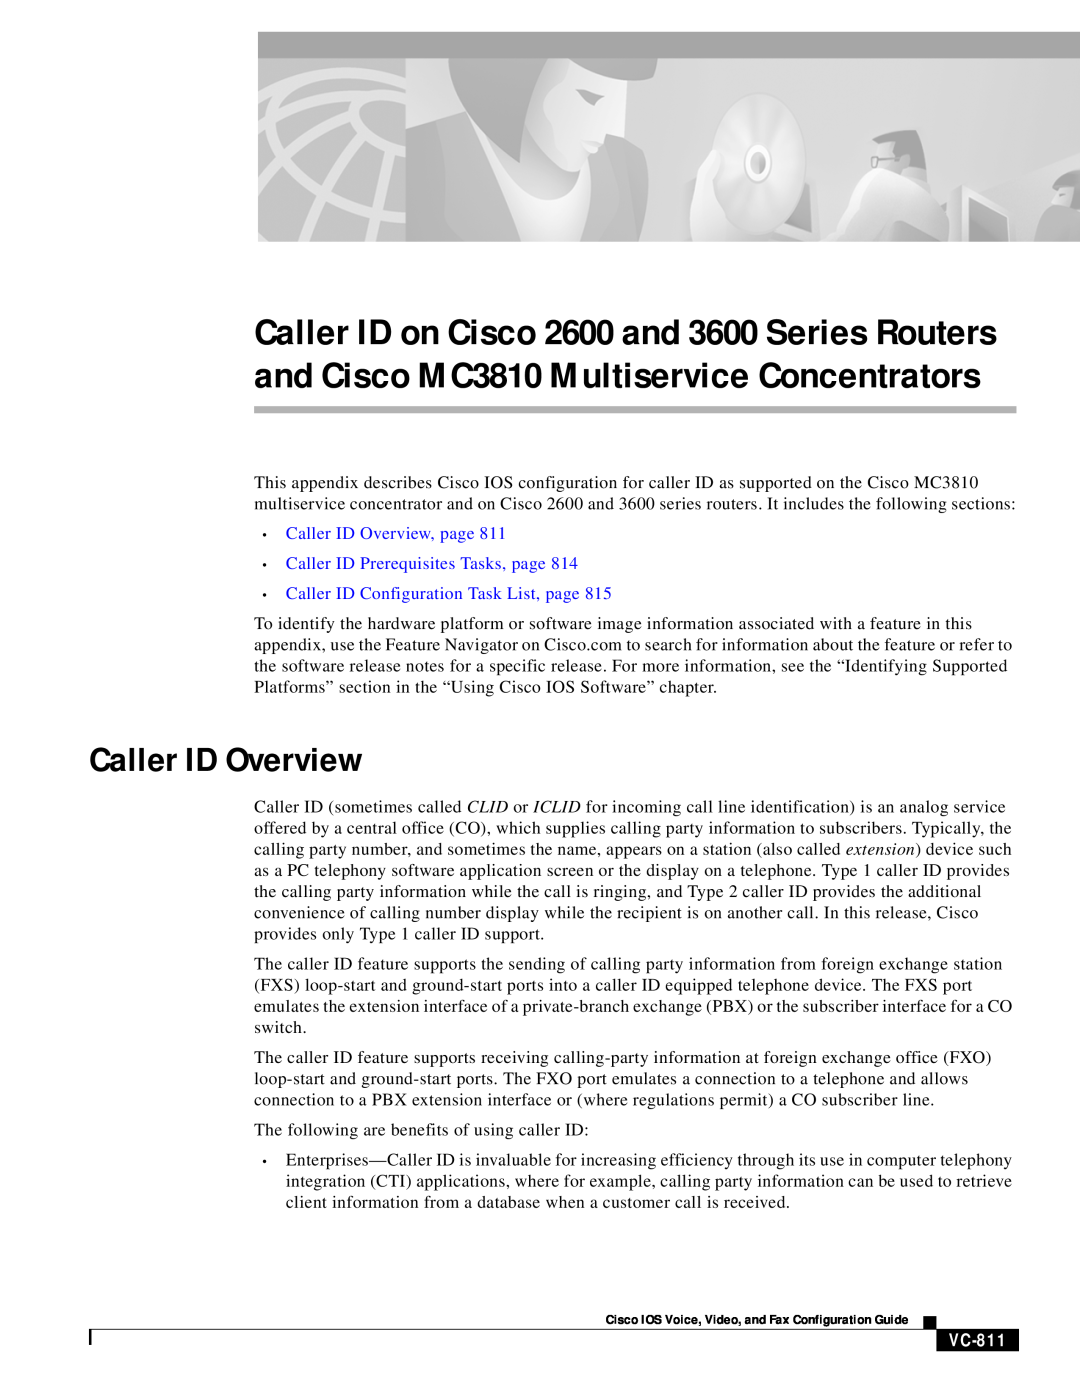 Cisco Systems 2600 appendix VC-811, Caller ID Overview, page Caller ID Prerequisites Tasks, page 